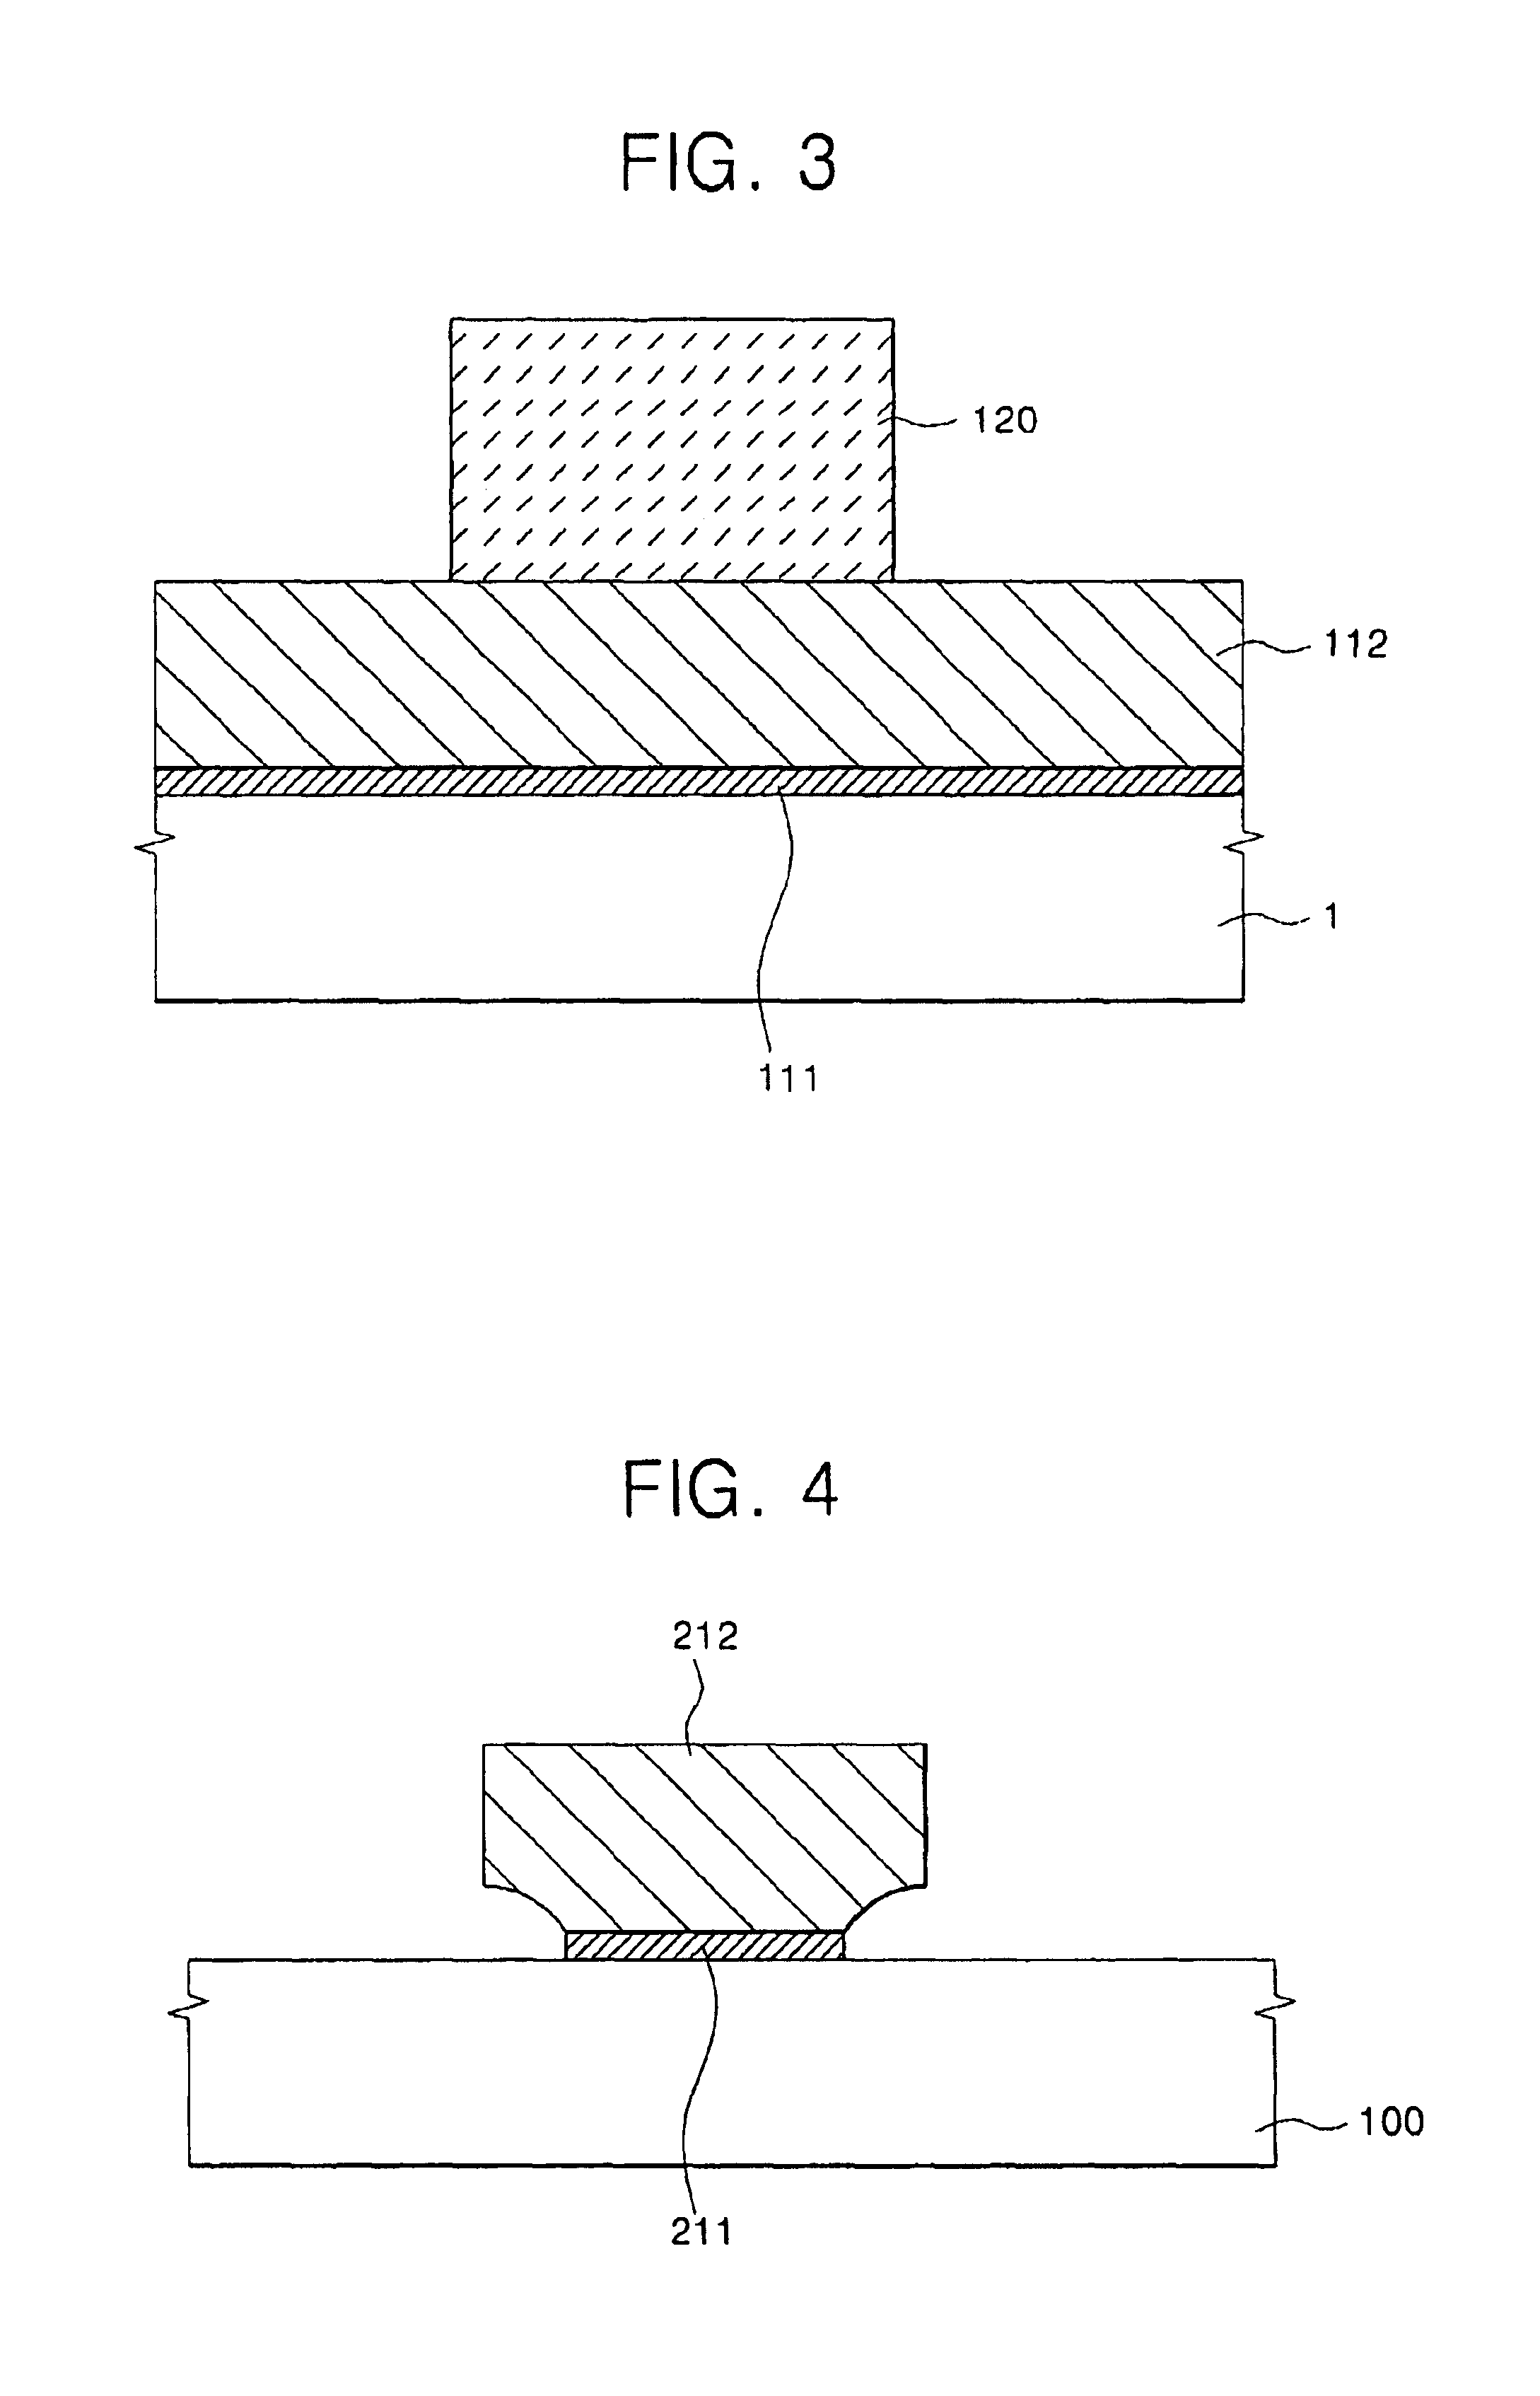 Method of fabricating semiconductor device having notched gate